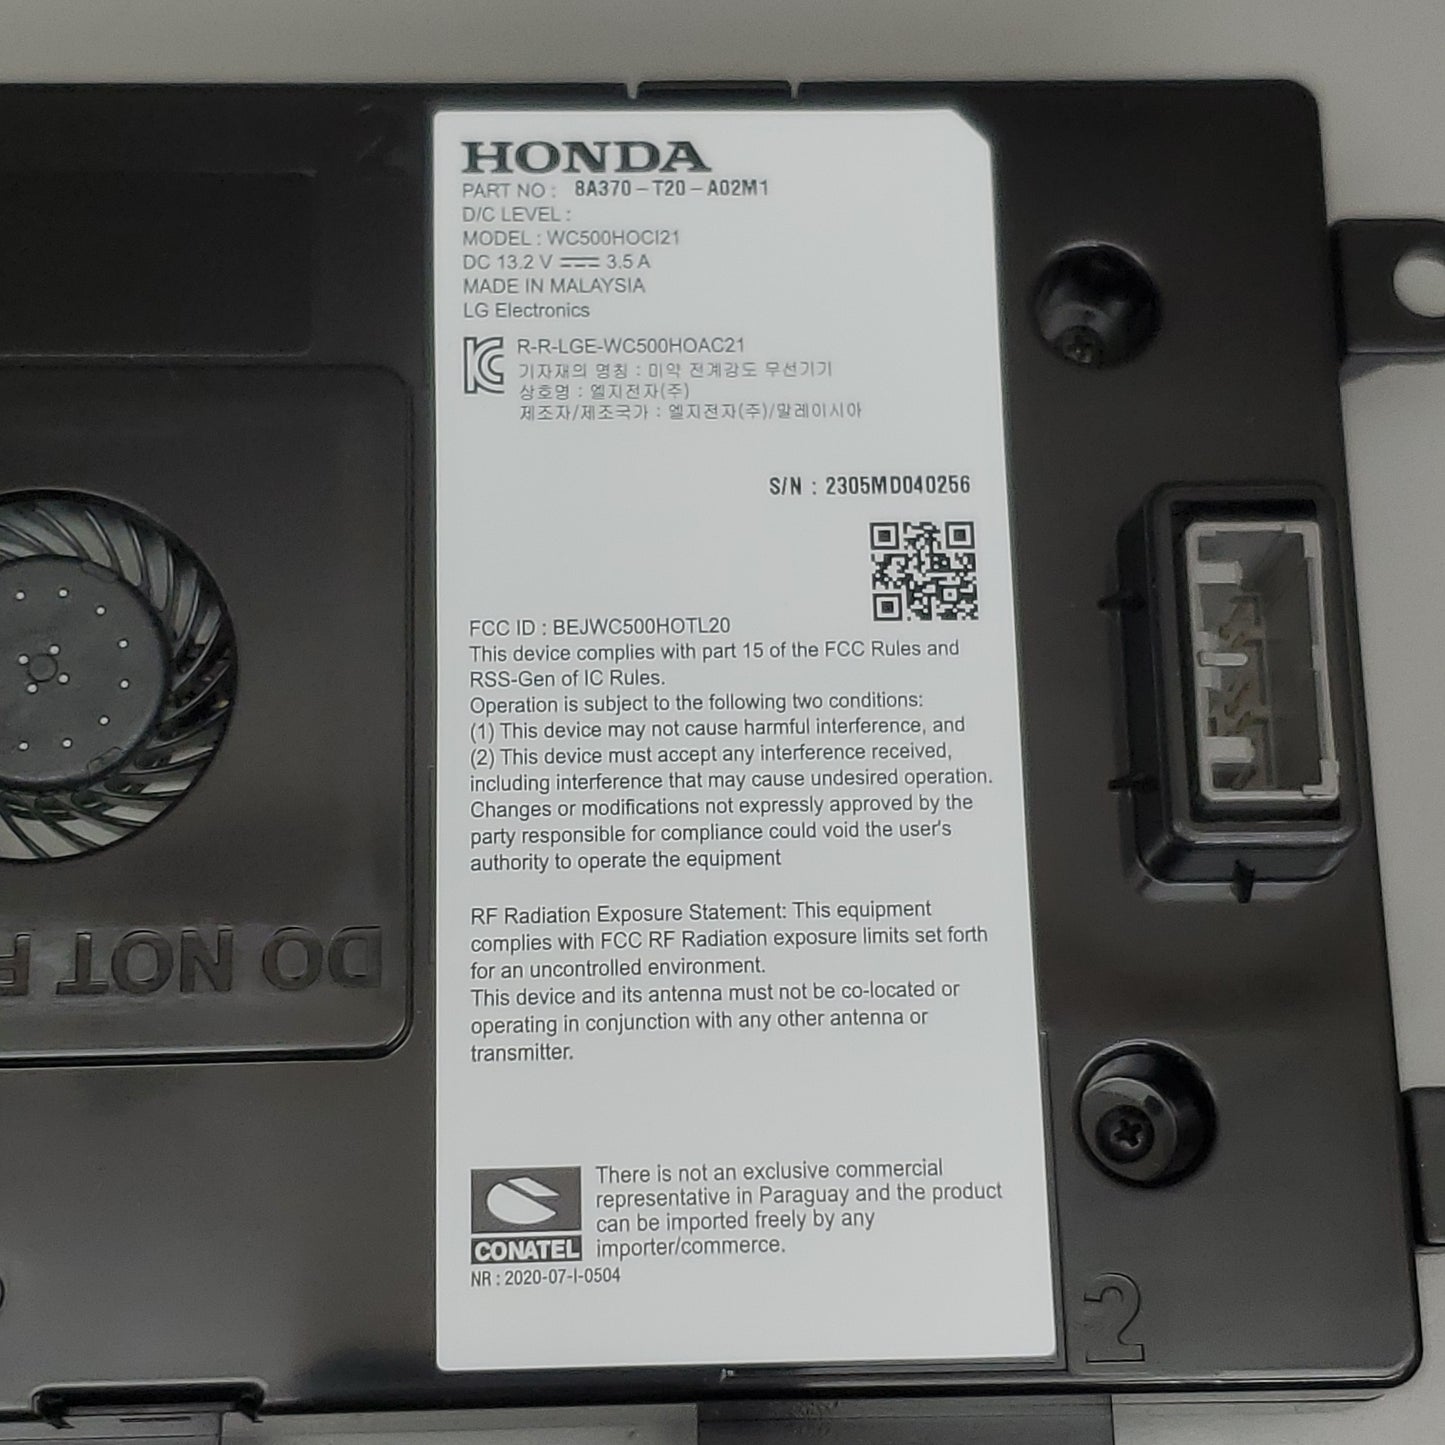 HONDA Wireless Phone Charger Pad/Unit 8A370-T20-A02M1 Genuine Part (New)